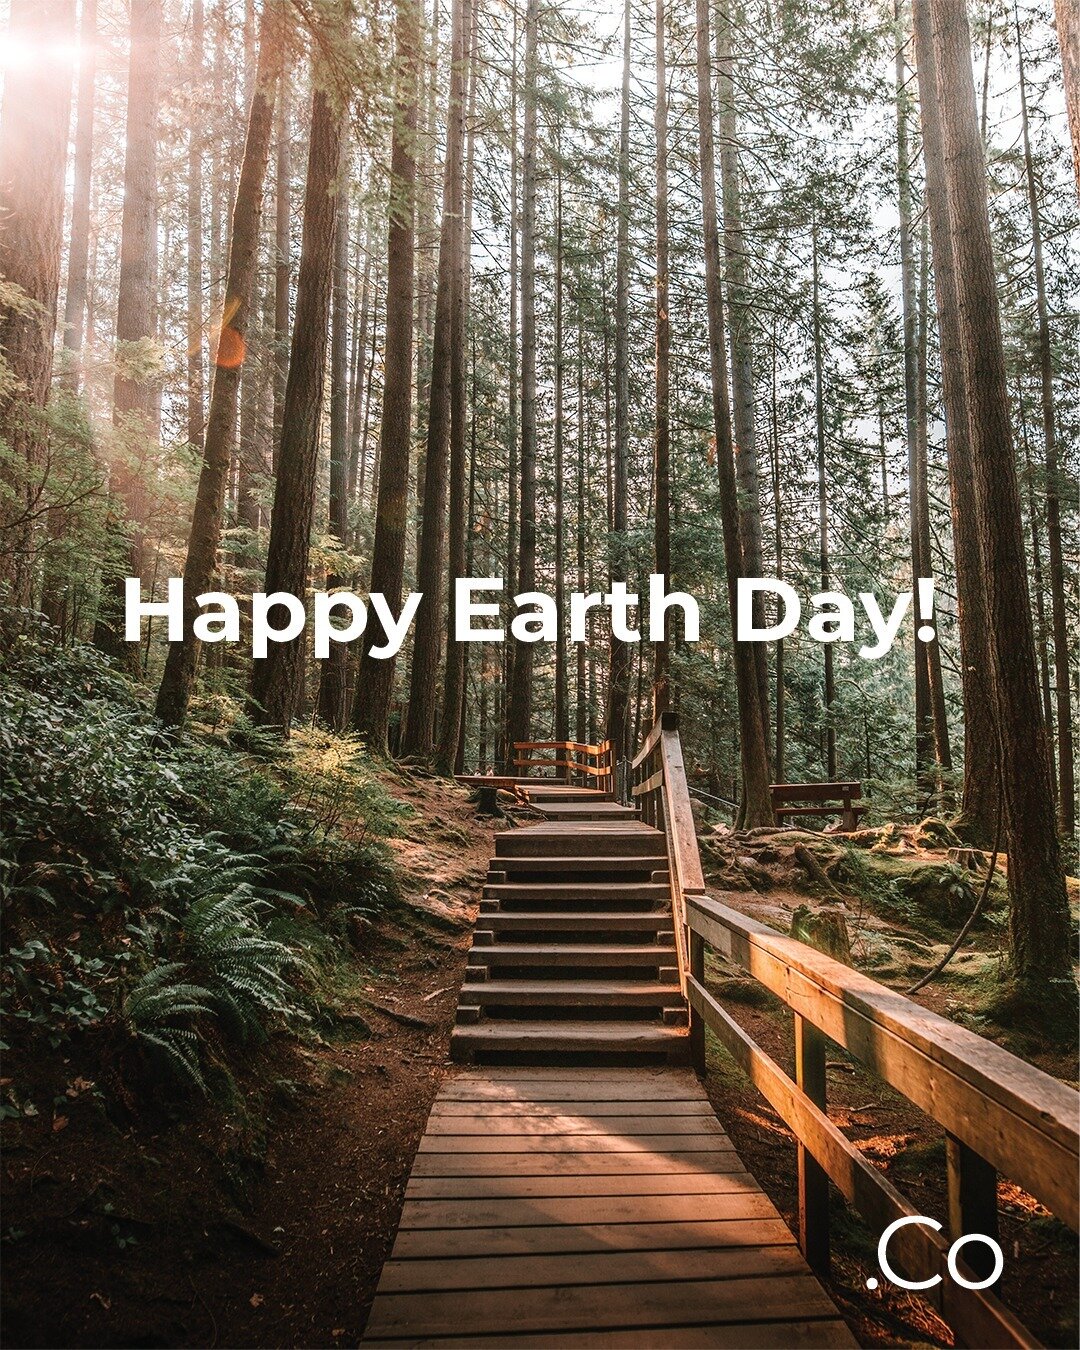 Earth Day reminds us that we are all in this together. 🌎 Let's create a greener tomorrow, today. 🌲

#EarthDay #Sustainability #GreenLiving #TogetherWeCan #CreativeOthers